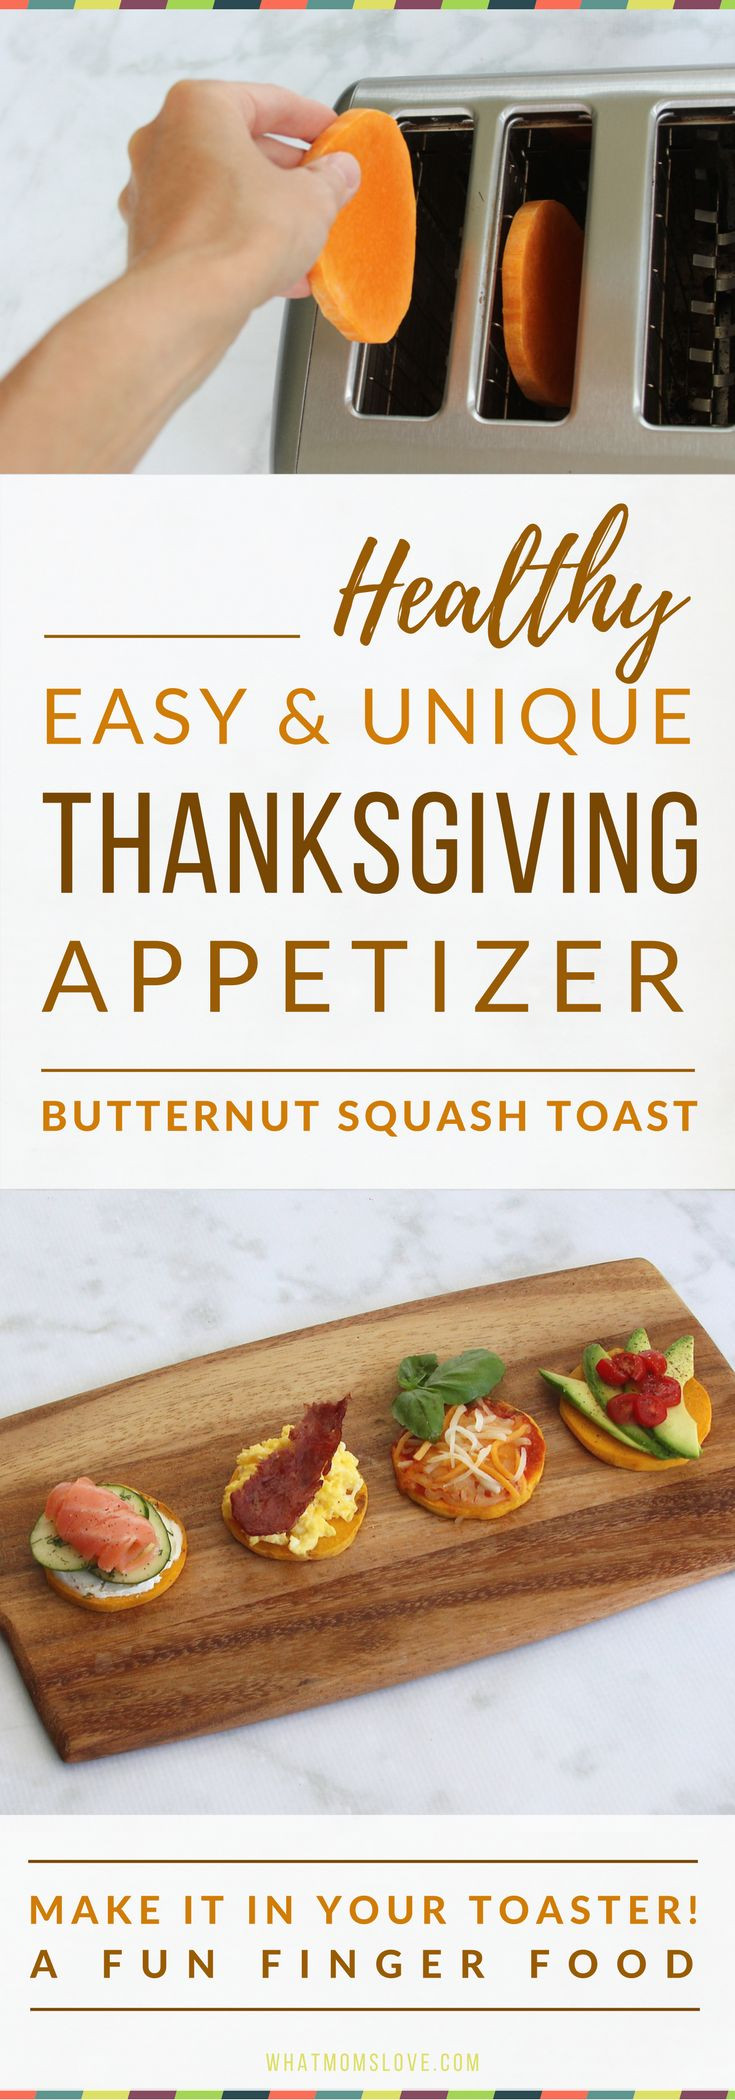 Healthy Thanksgiving Appetizers Easy
 123 best Thanksgiving images on Pinterest